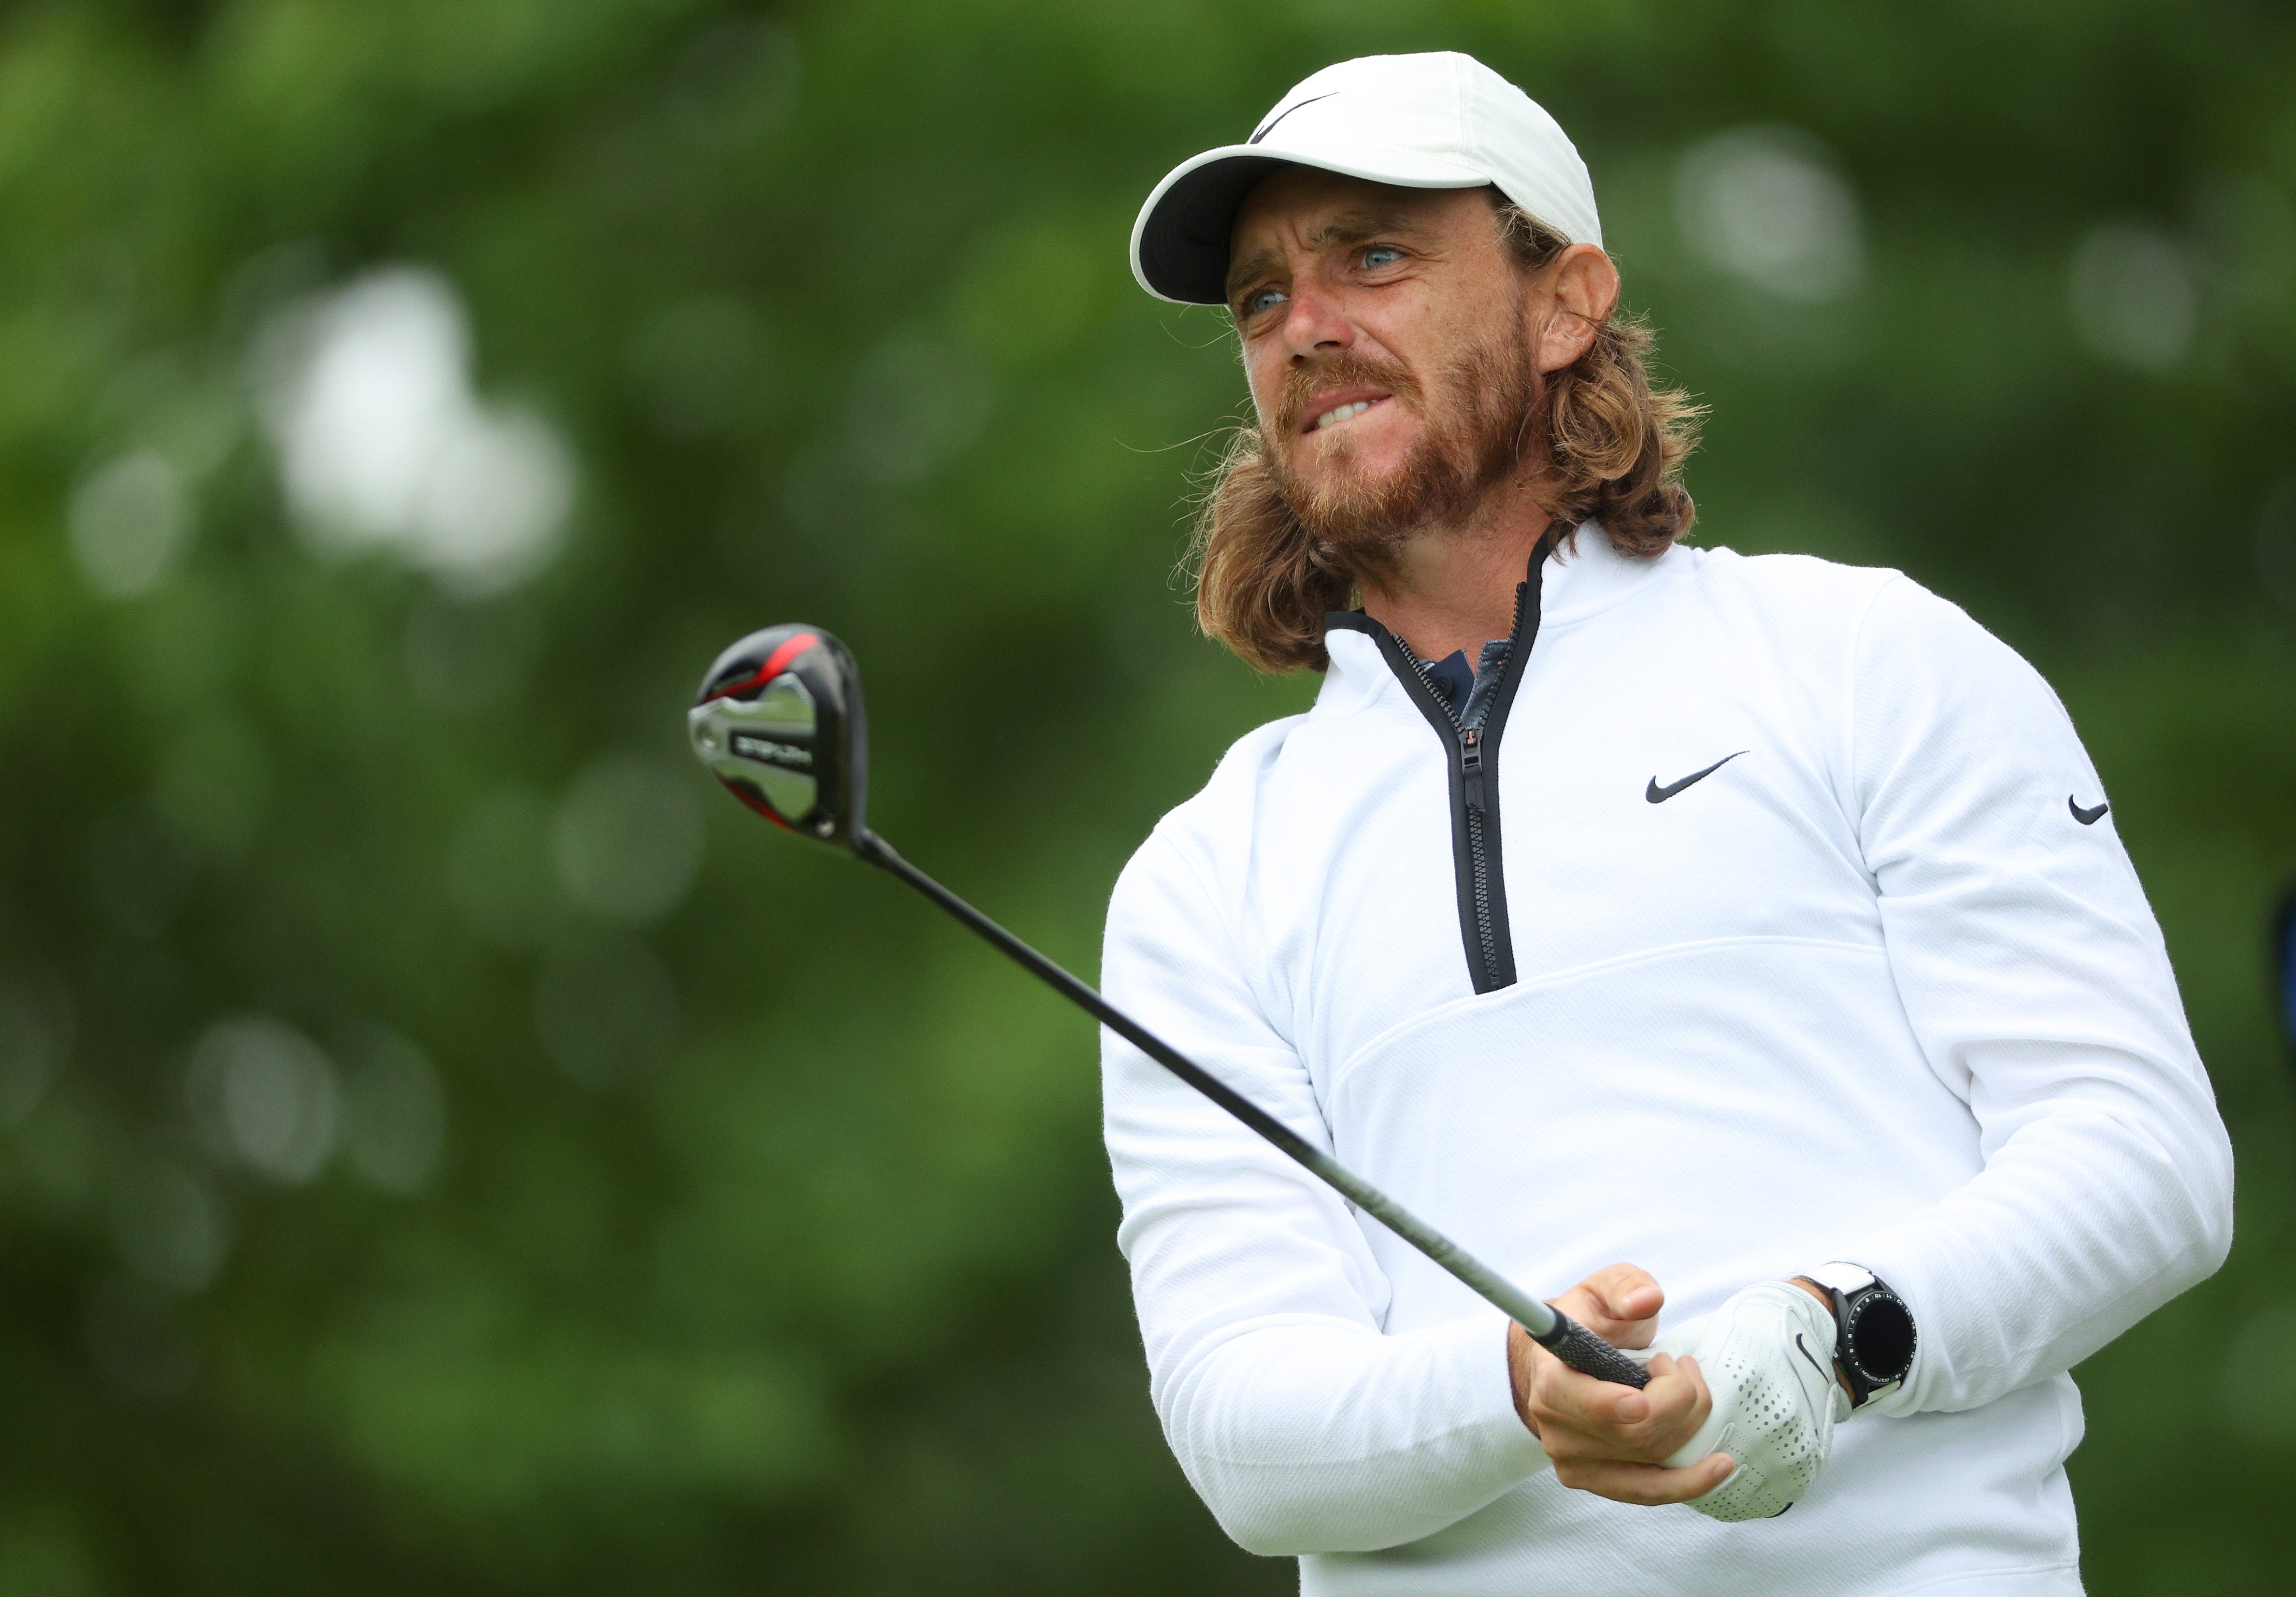 Tommy Fleetwood is still looking for his first major win